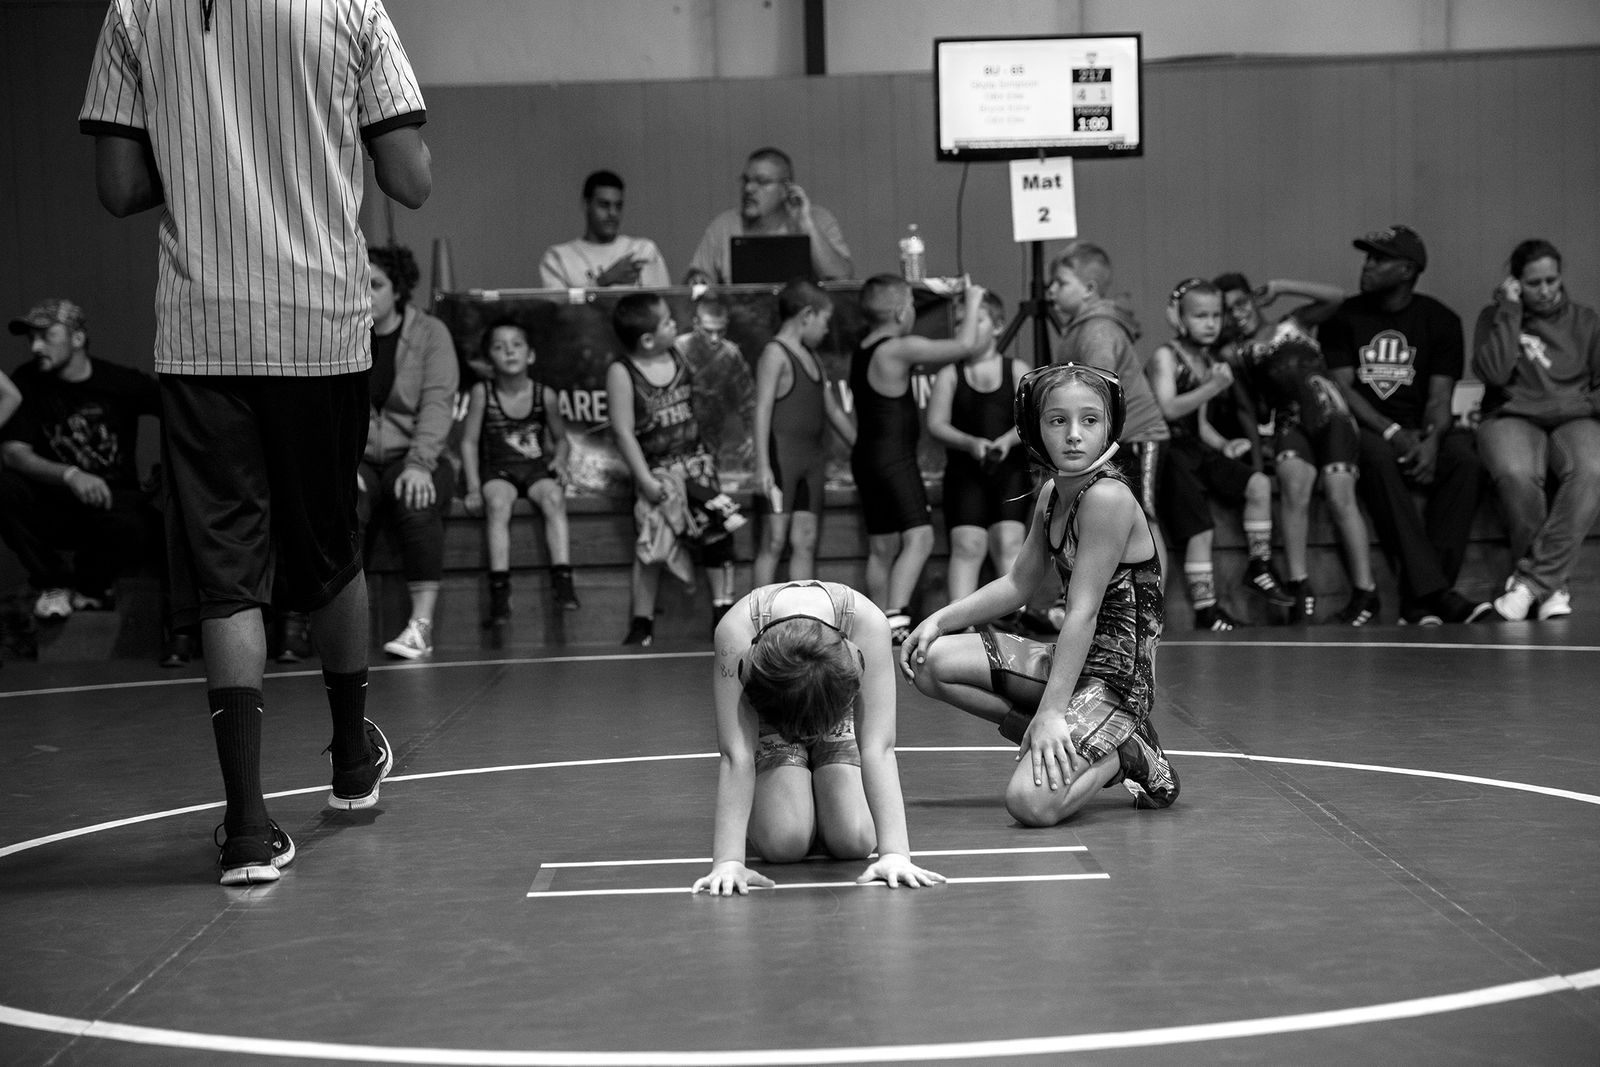 © Rachel Jessen - Image from the GIRL WRESTLE photography project